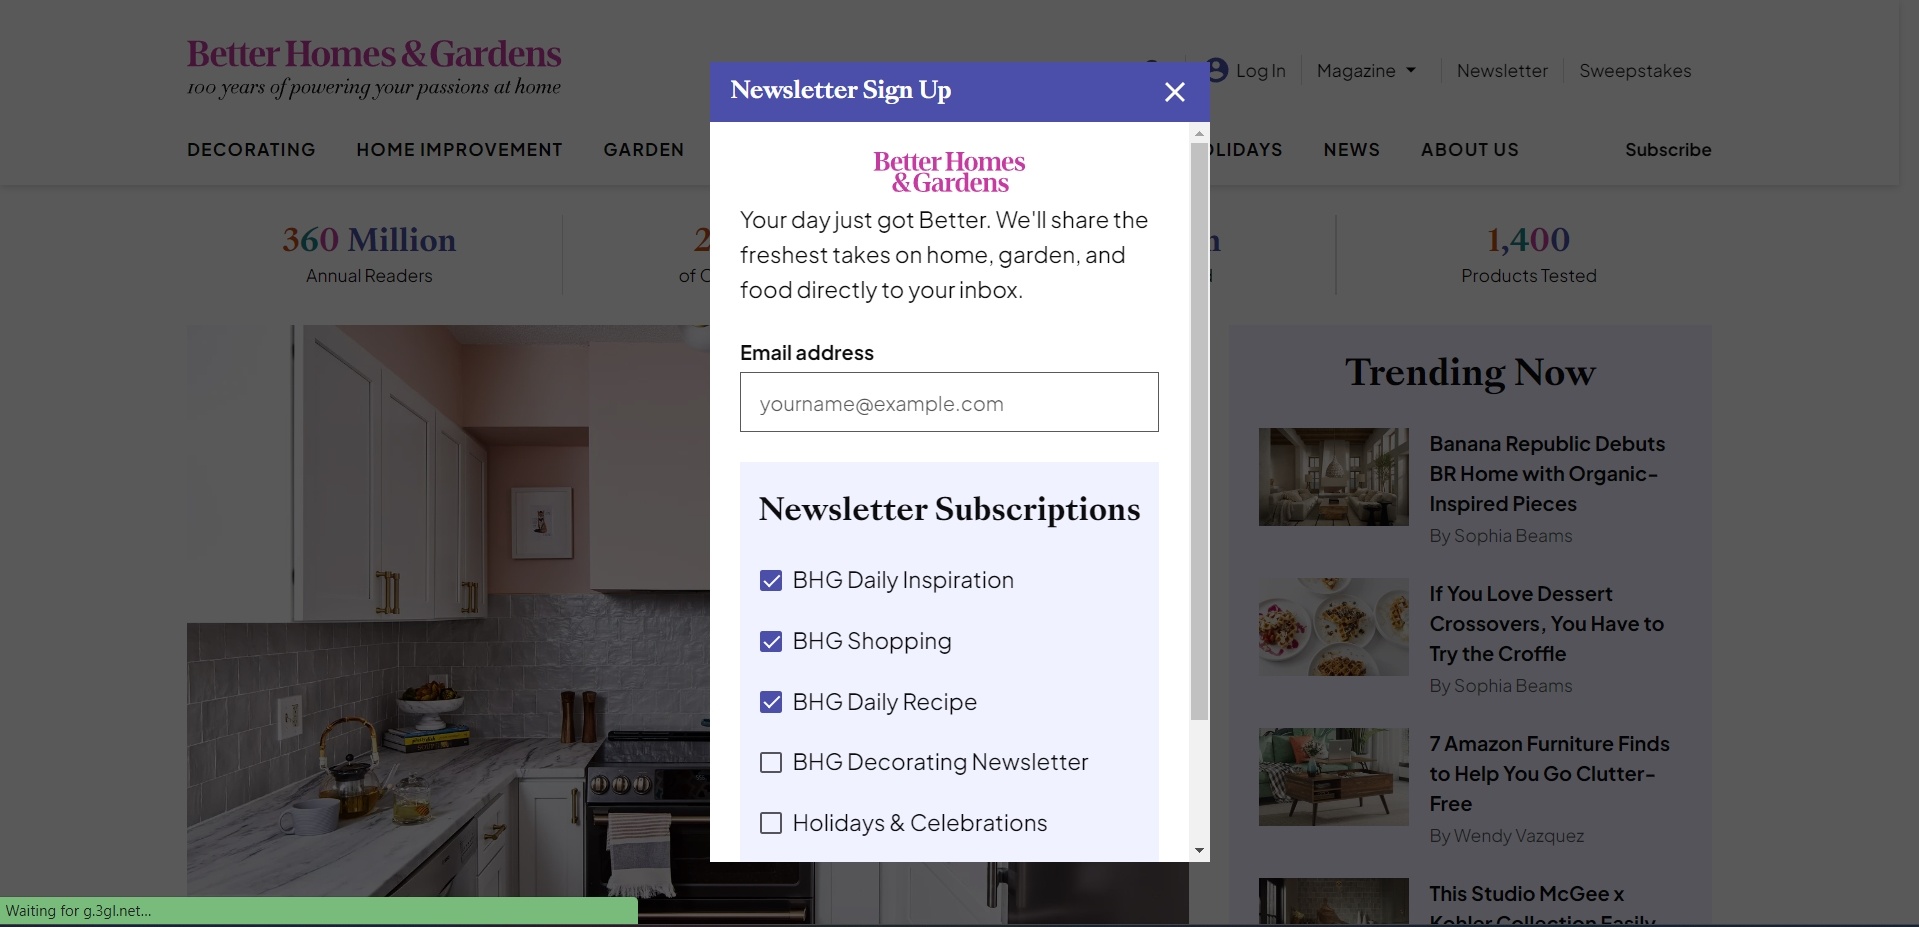 Better Homes and Gardens email sign up example for their newsletter